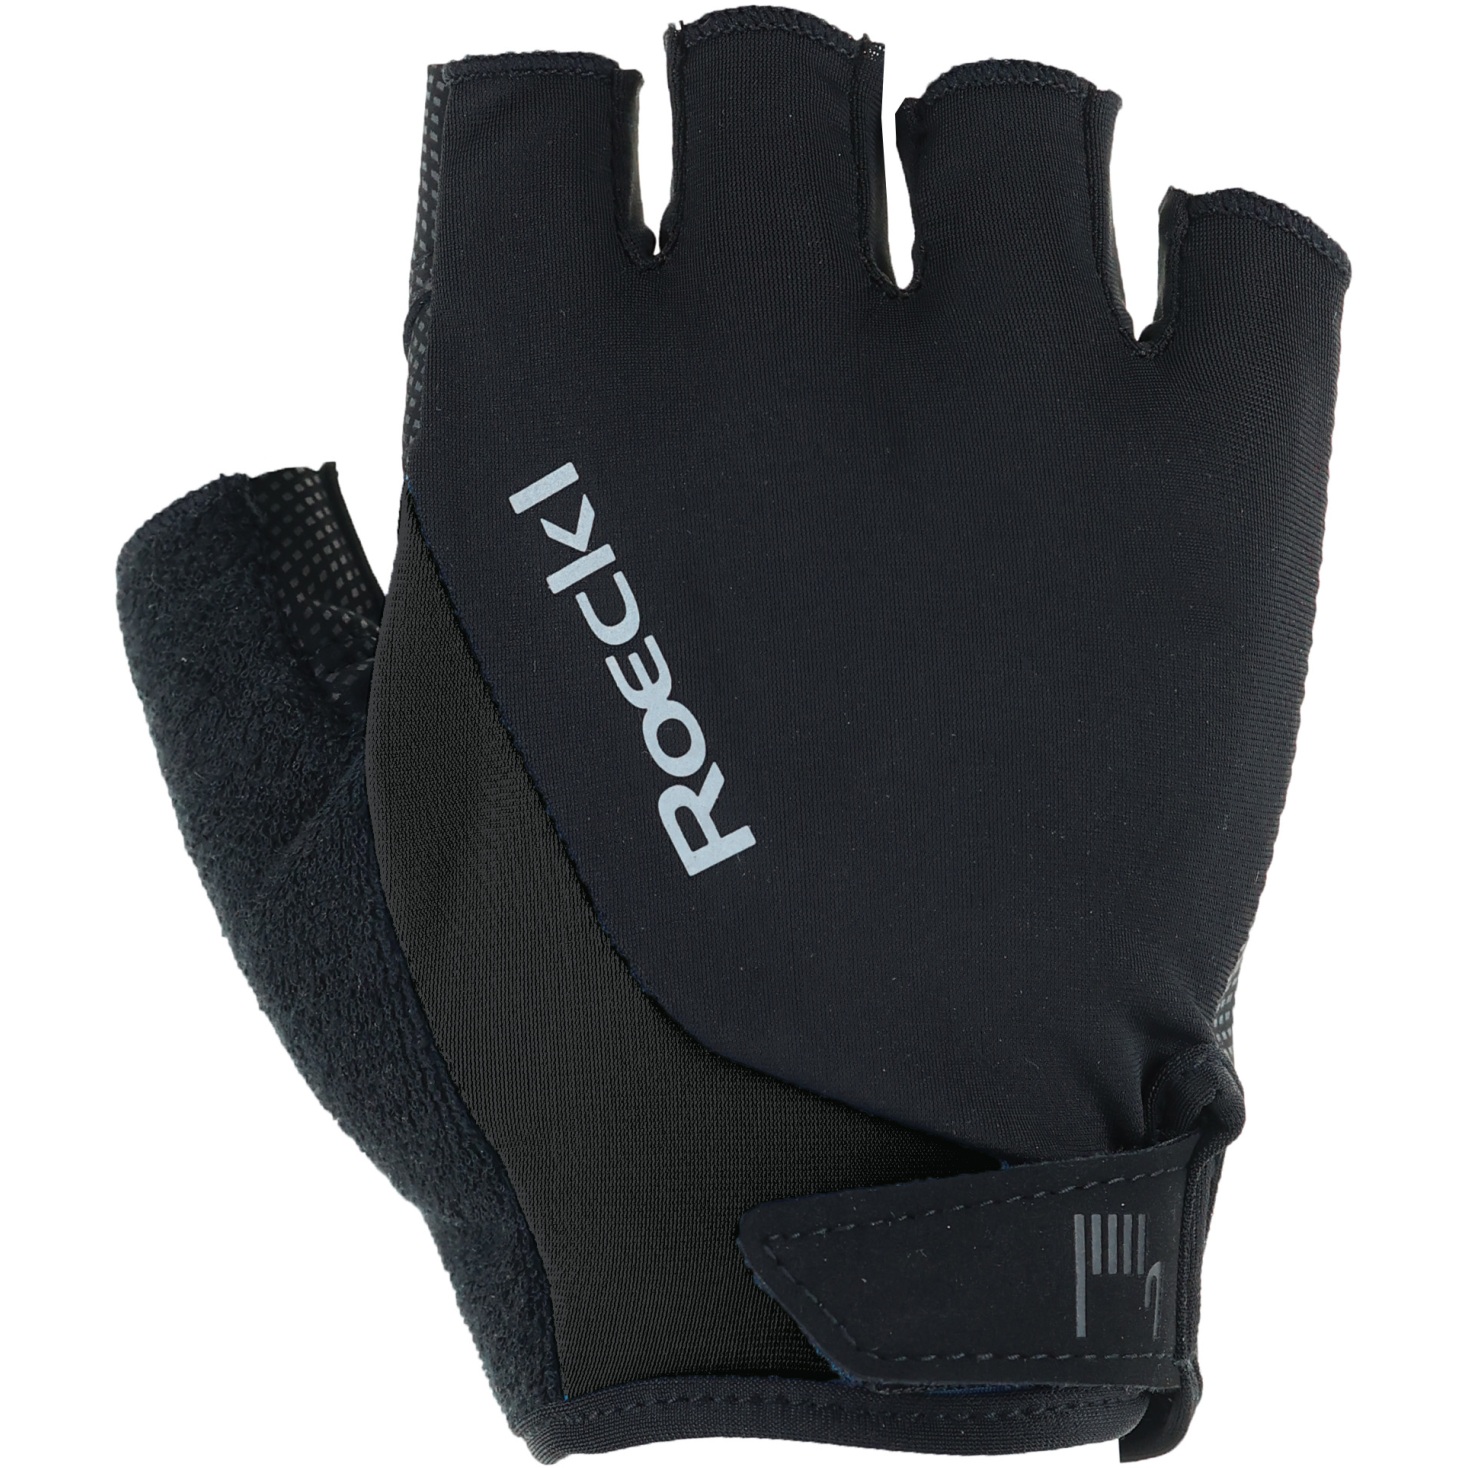 Picture of Roeckl Sports Basel 2 Cycling Gloves - black 9000